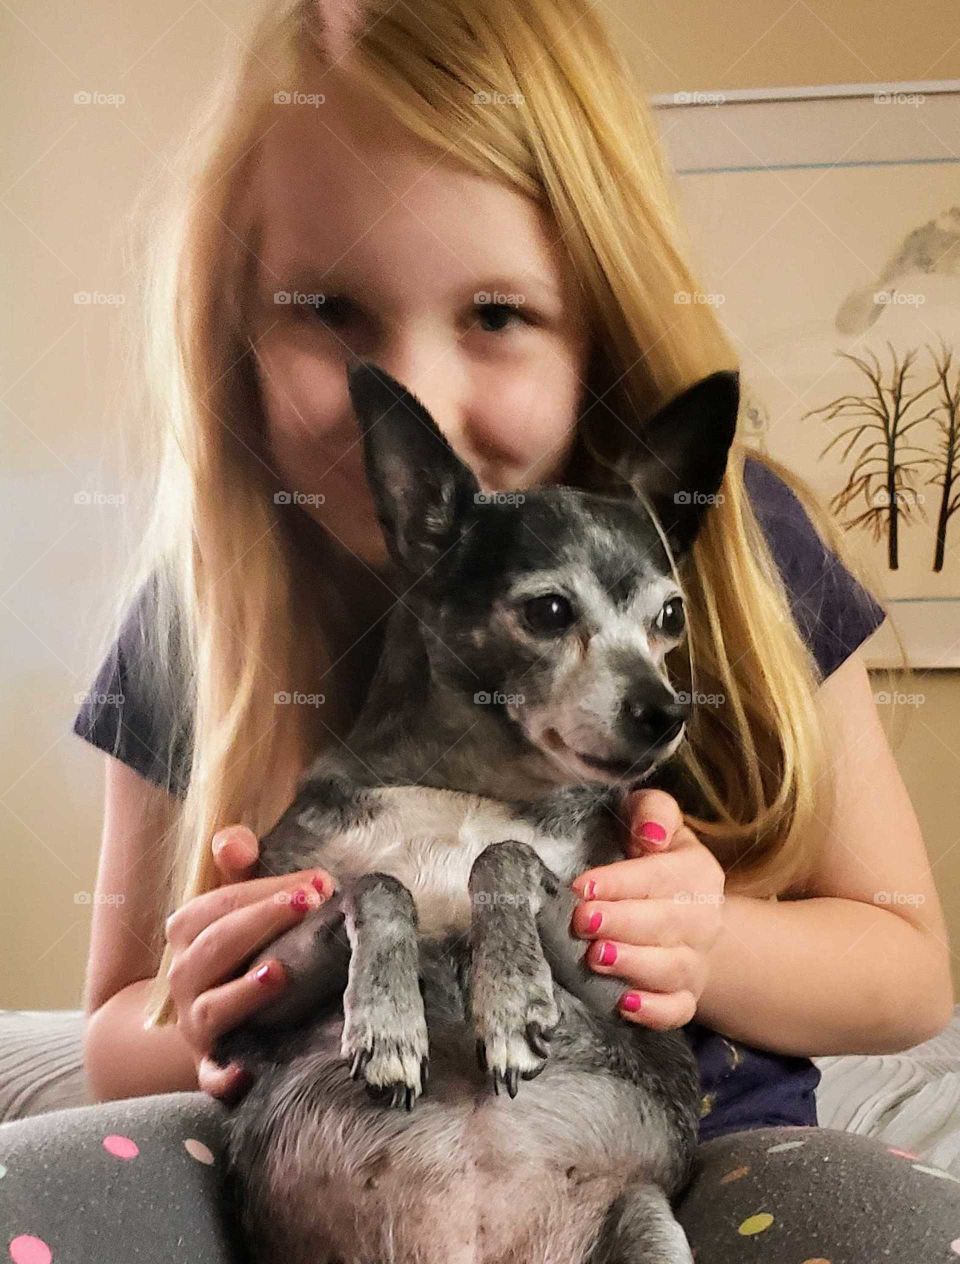 Smiling blonde girl holding her favorite grey and black dog while staring into the camera